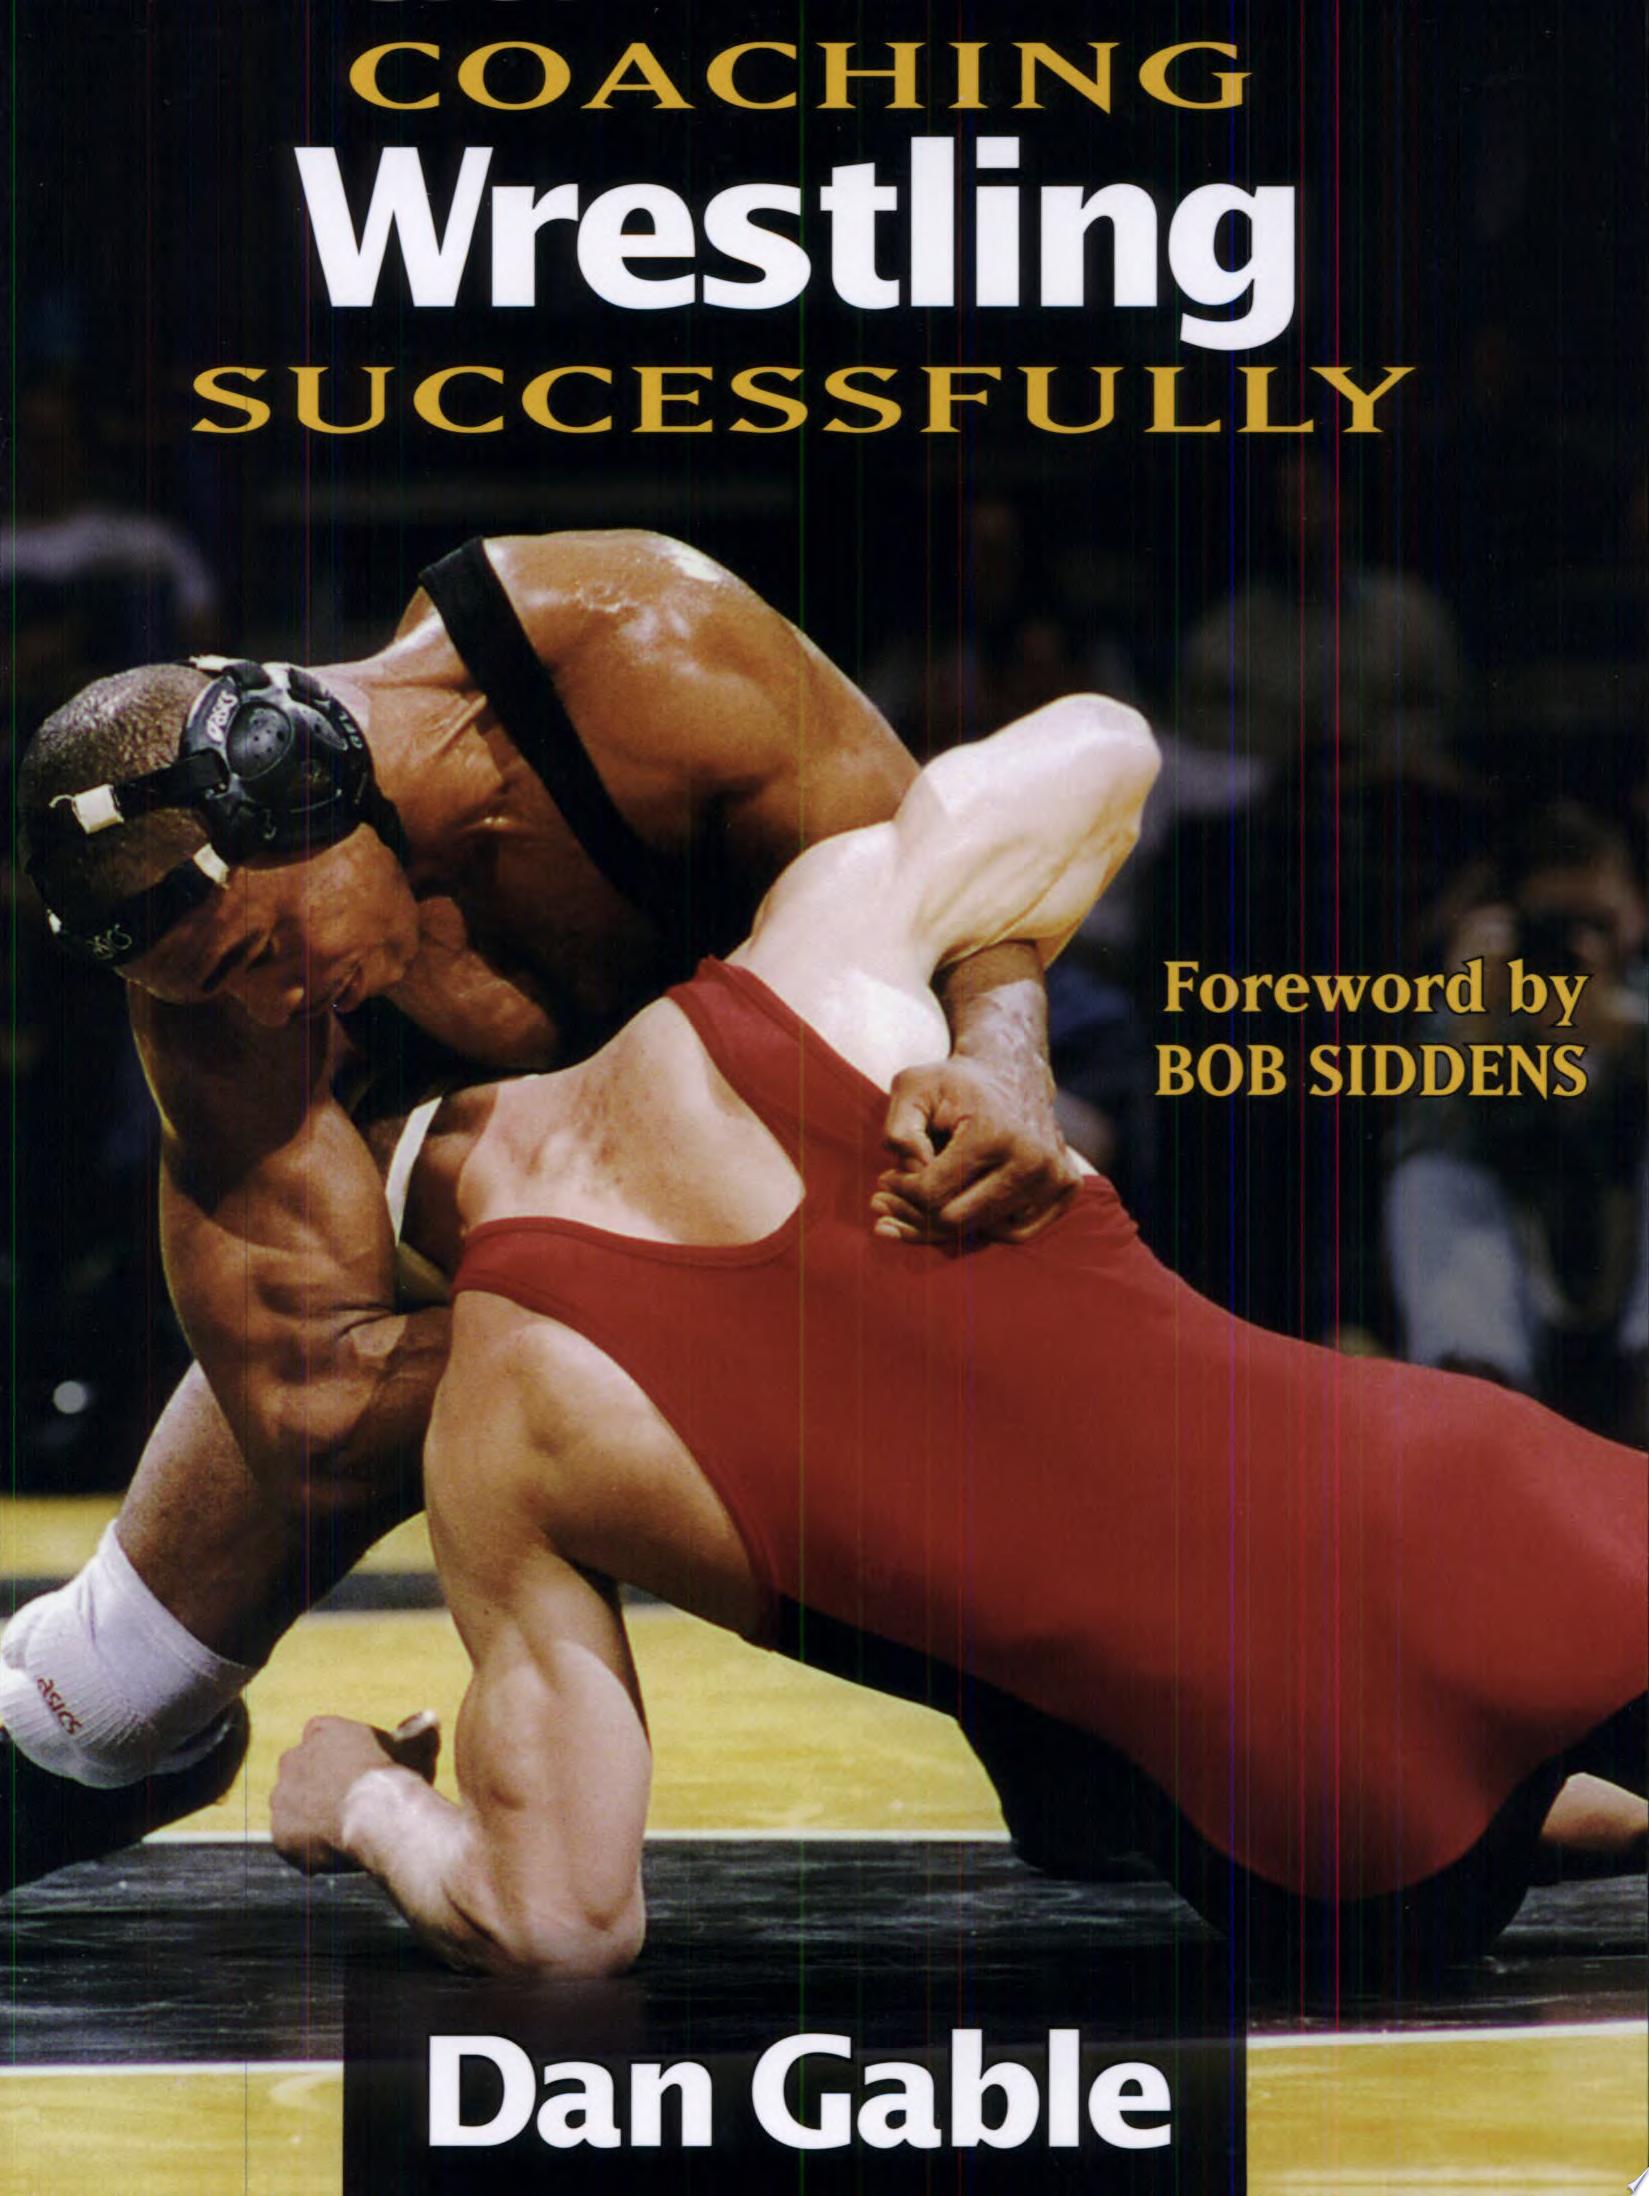 Image for "Coaching Wrestling Successfully"